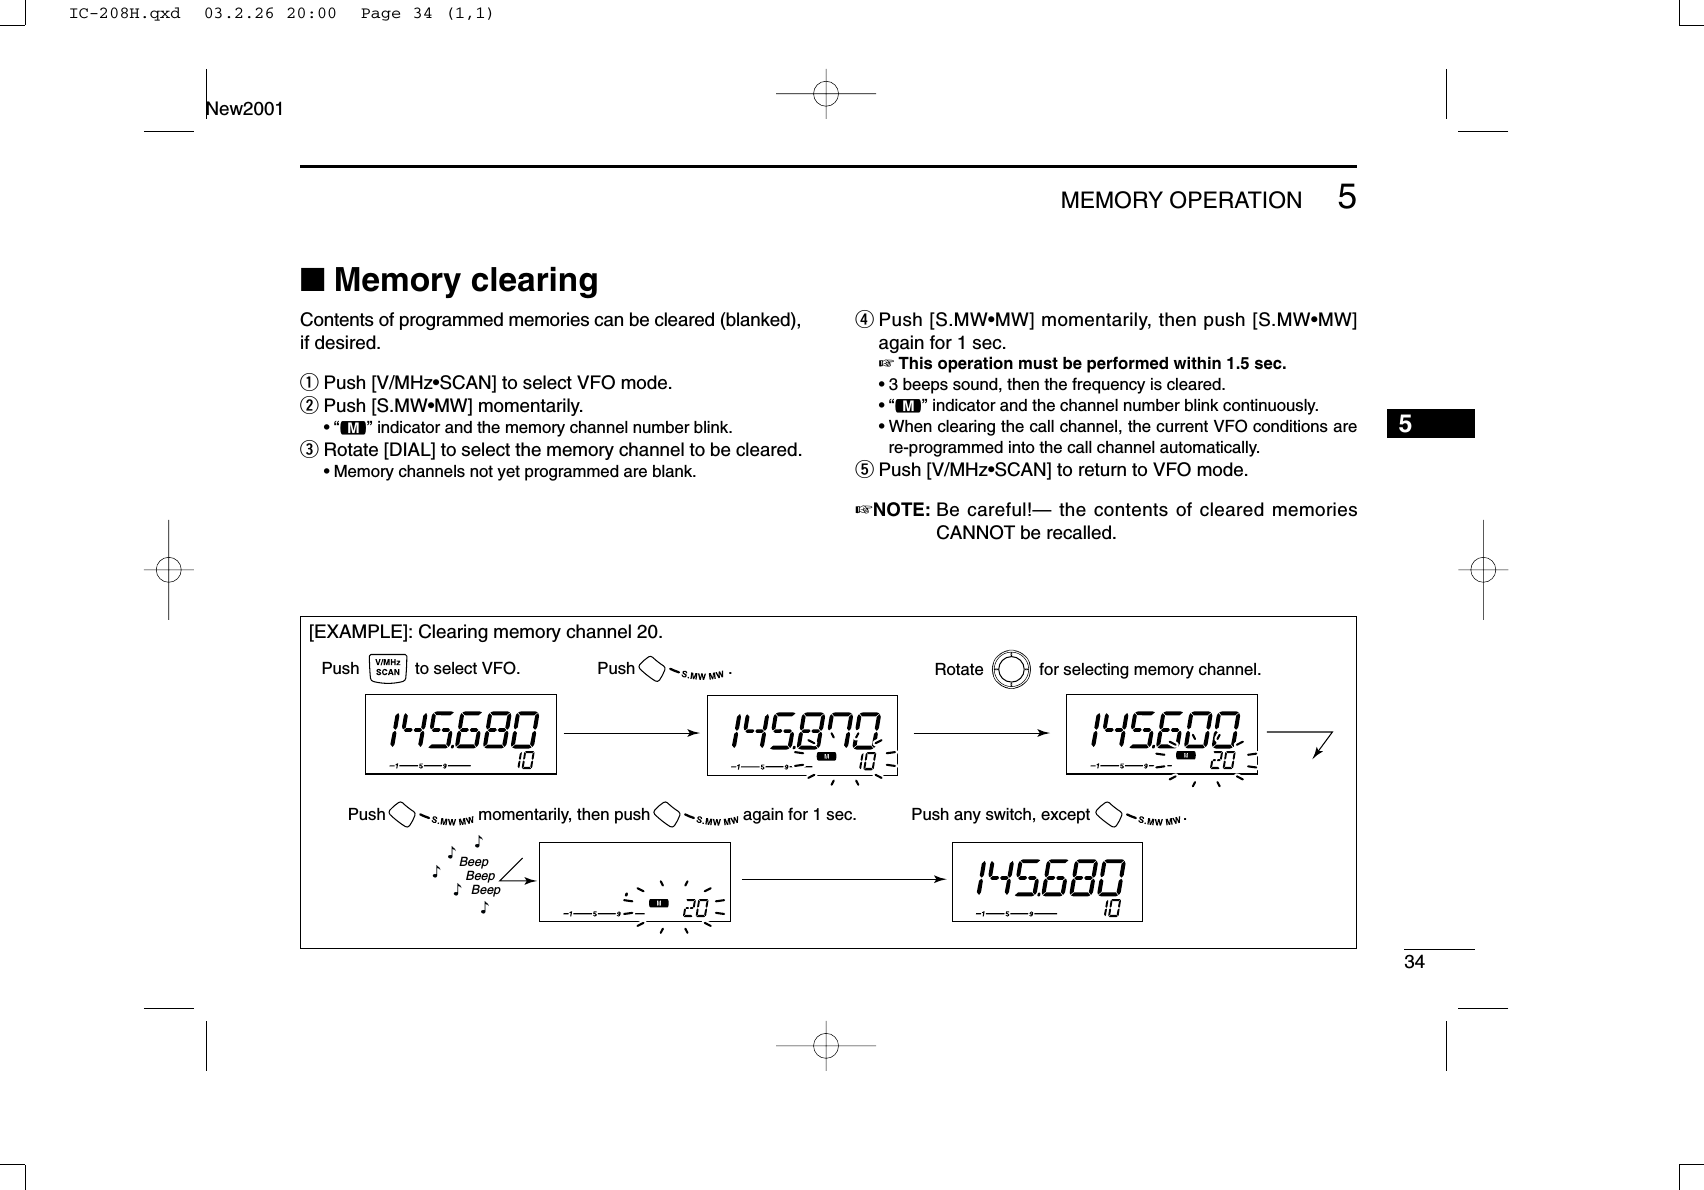 5MEMORY OPERATION34New20015■Memory clearingContents of programmed memories can be cleared (blanked),if desired.qPush [V/MHz•SCAN] to select VFO mode.wPush [S.MW•MW] momentarily.•“!” indicator and the memory channel number blink.eRotate [DIAL] to select the memory channel to be cleared.•Memory channels not yet programmed are blank.rPush [S.MW•MW] momentarily, then push [S.MW•MW]again for 1 sec.☞This operation must be performed within 1.5 sec.•3 beeps sound, then the frequency is cleared.•“!” indicator and the channel number blink continuously.•When clearing the call channel, the current VFO conditions arere-programmed into the call channel automatically.tPush [V/MHz•SCAN] to return to VFO mode.☞NOTE: Be careful!— the contents of cleared memoriesCANNOT be recalled.[EXAMPLE]: Clearing memory channel 20.Push            to select VFO. Rotate            for selecting memory channel.Push                    .Push any switch, except                    .Push                    momentarily, then push                    again for 1 sec.BeepBeepBeep“““““IC-208H.qxd  03.2.26 20:00  Page 34 (1,1)